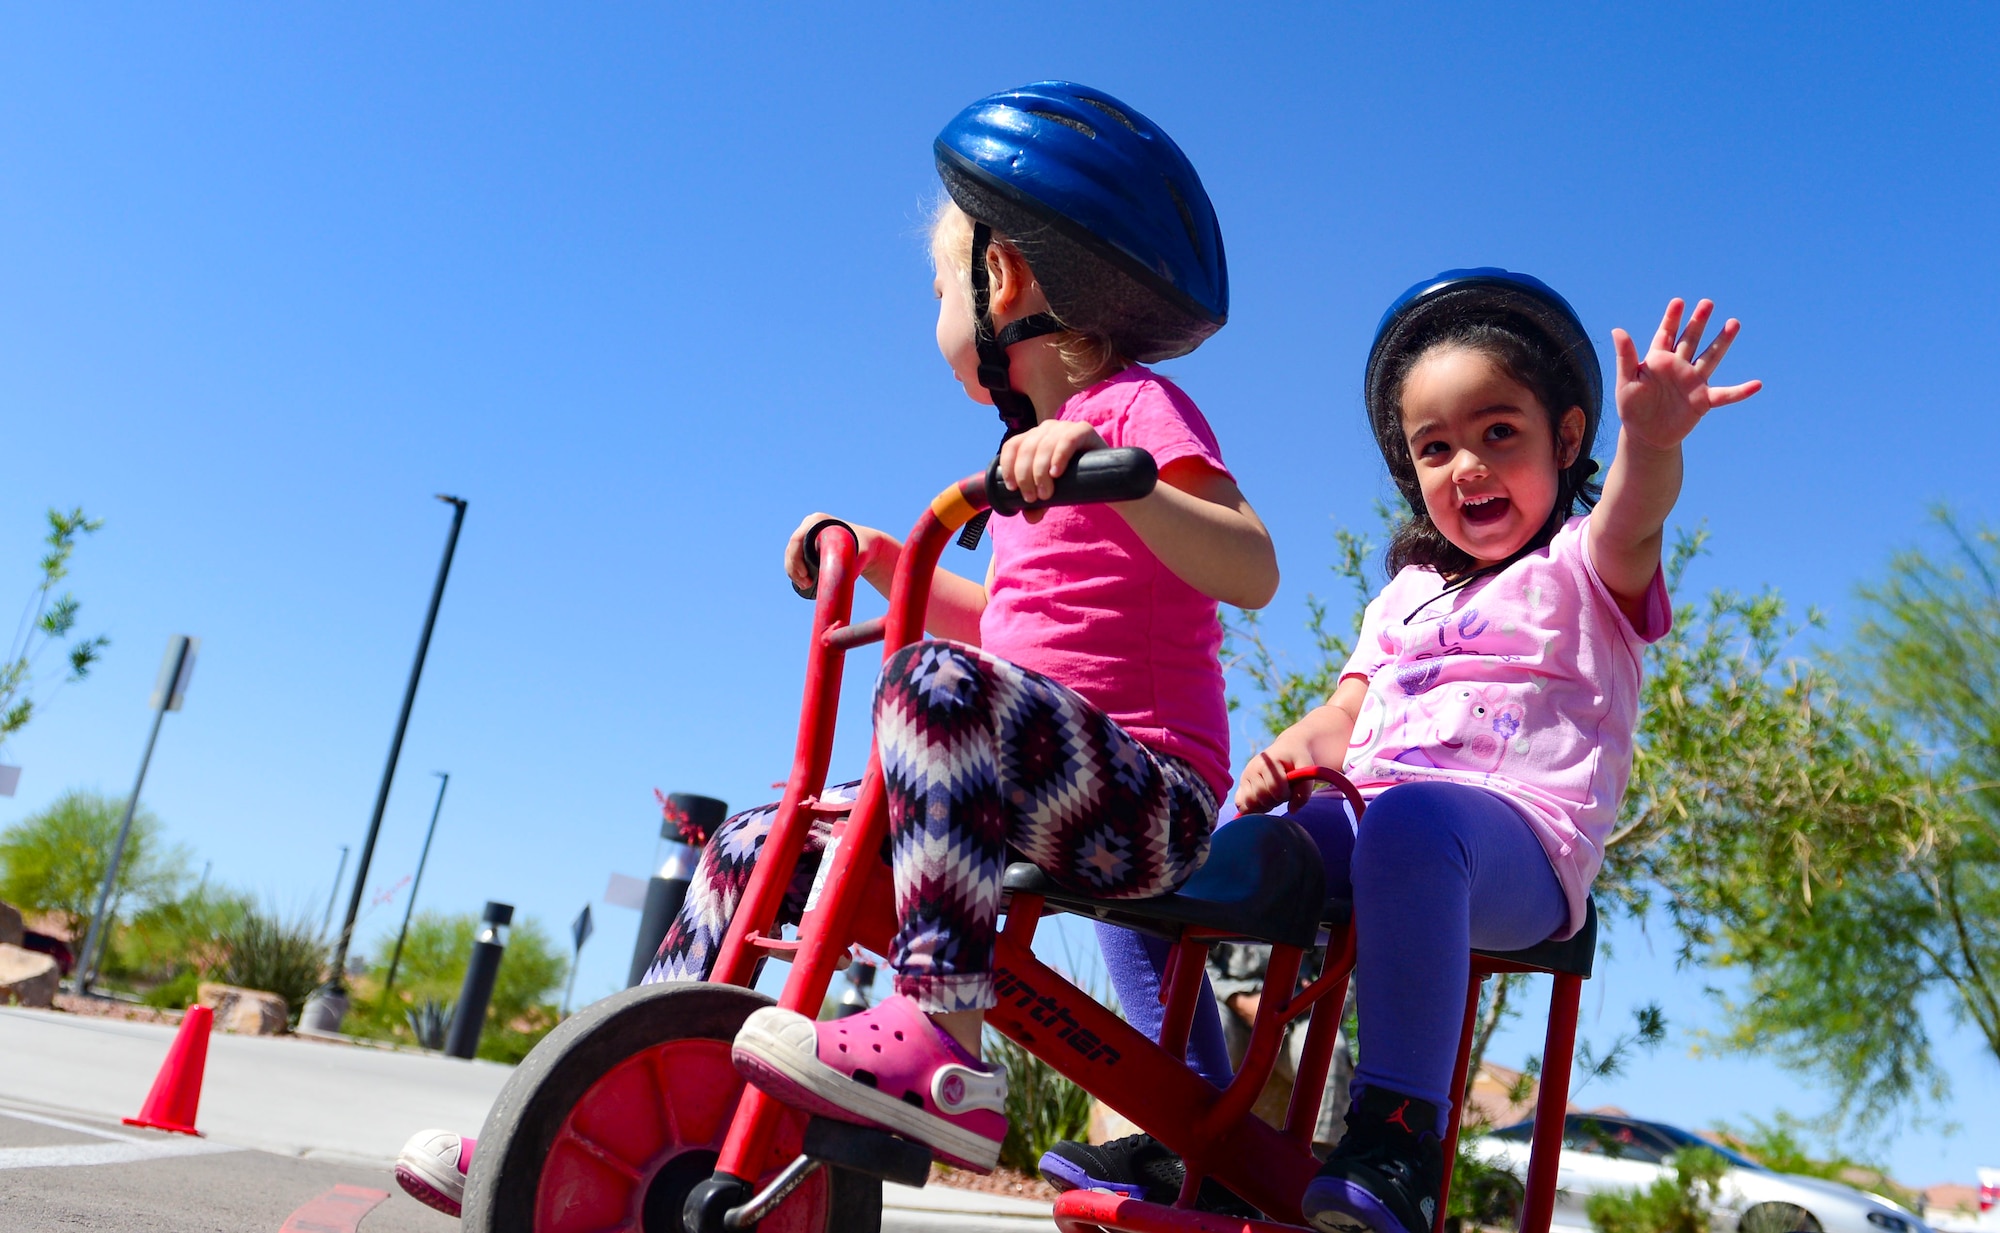 Children participate in the trike-a-thon at the Nellis Child Development Center on Nellis Air Force Base, Nev., April 14, 2017. The trike-a-thon was one of several activities held in April to celebrate the Month of the Military Child. (U.S. Air Force photo by Airman 1st Class Nathan Byrnes/Released)